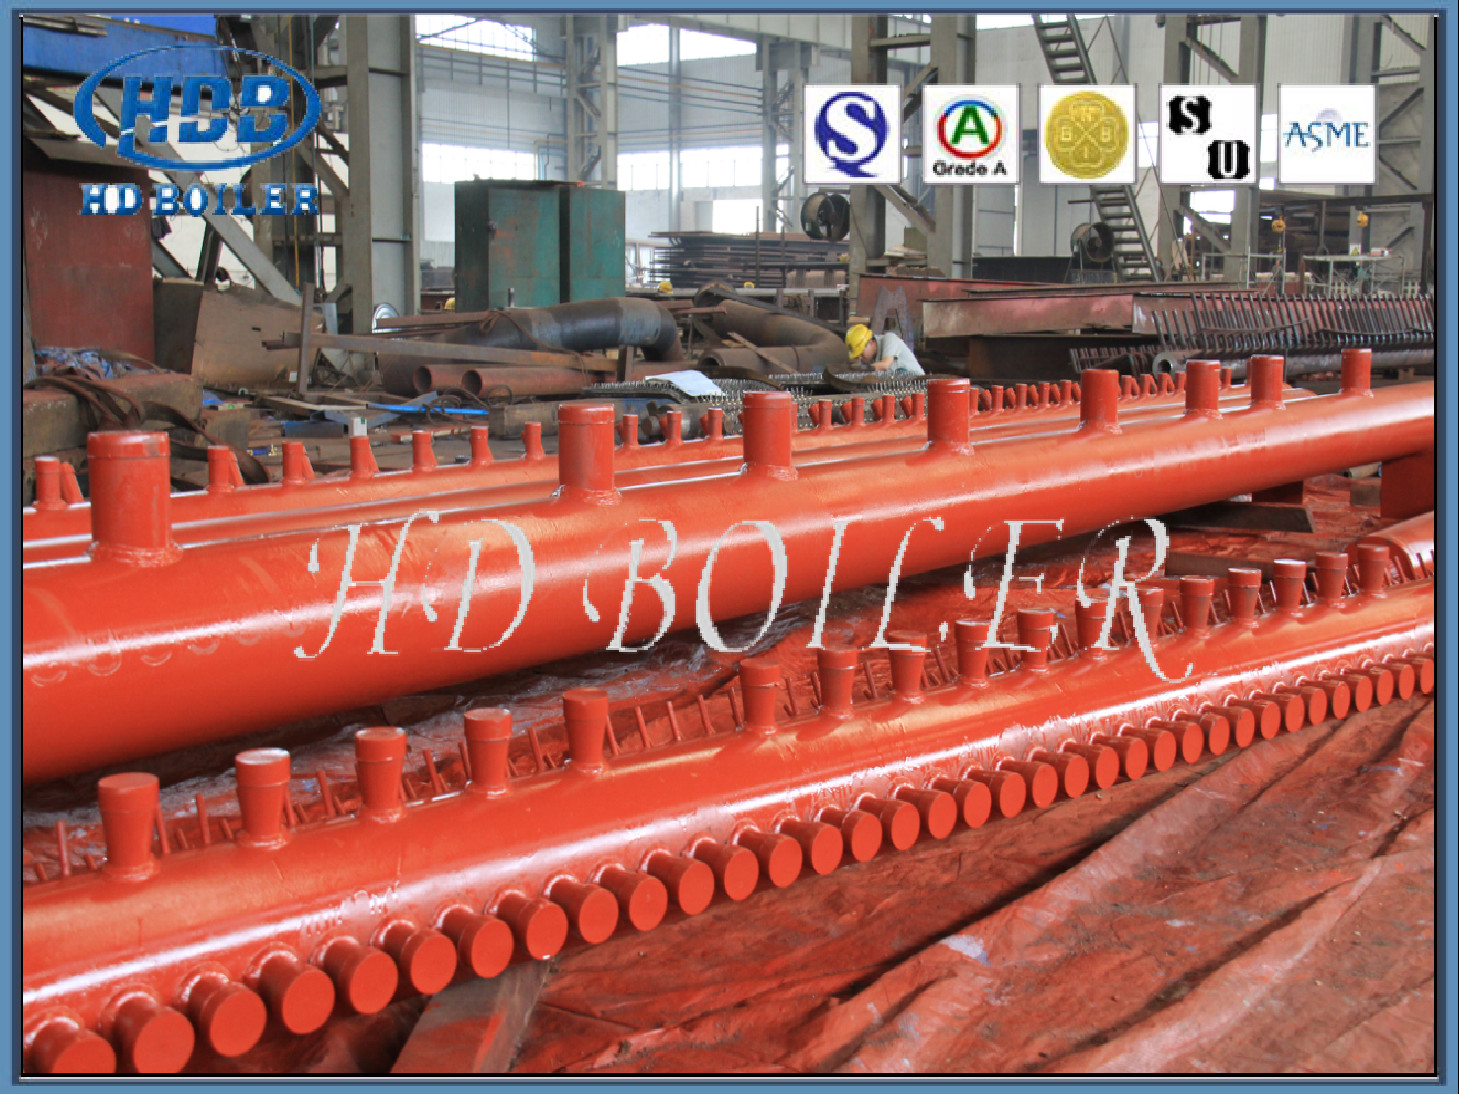 Alloy Steel Boiler Manifold Header For Coal Fired Boiler Economizer And Water Wall Panel